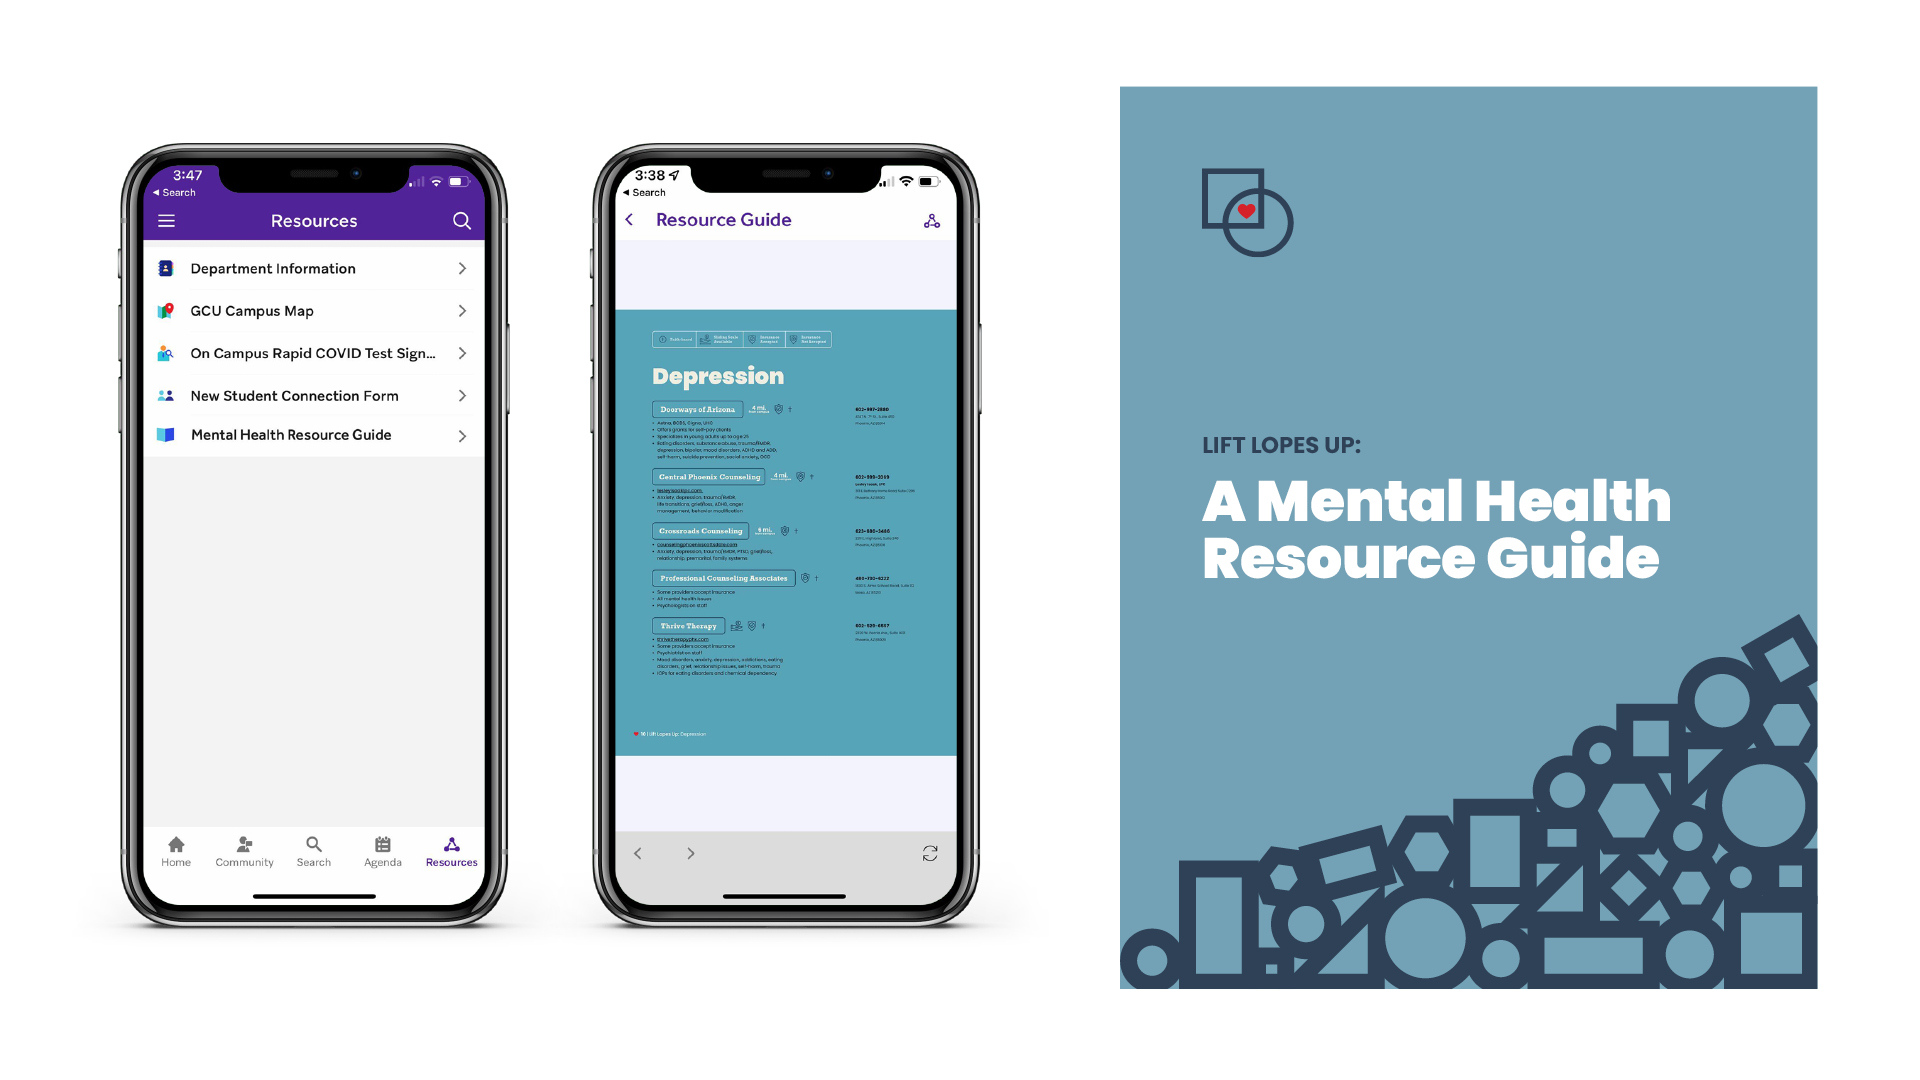 featured image three:Lift Lopes Up: Mental Health Campaign